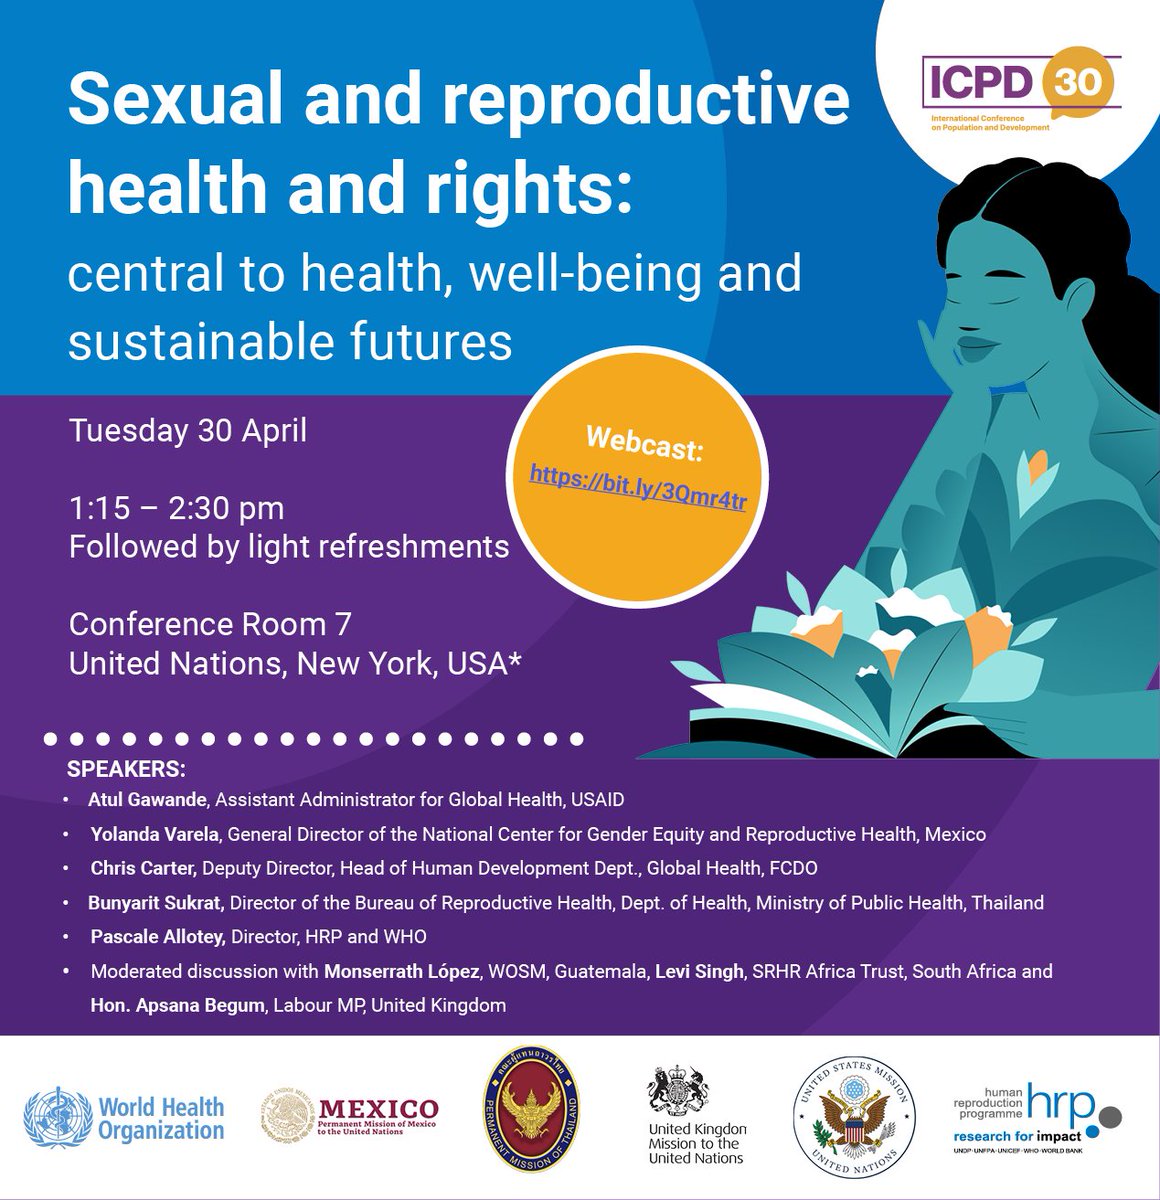 Happening now! (1:15 to 2:30 EDT) Sexual and reproductive health and rights: central to health, well-being and sustainable futures #ICPD30 Join online here: bit.ly/3Qmr4tr Speaker list below👇